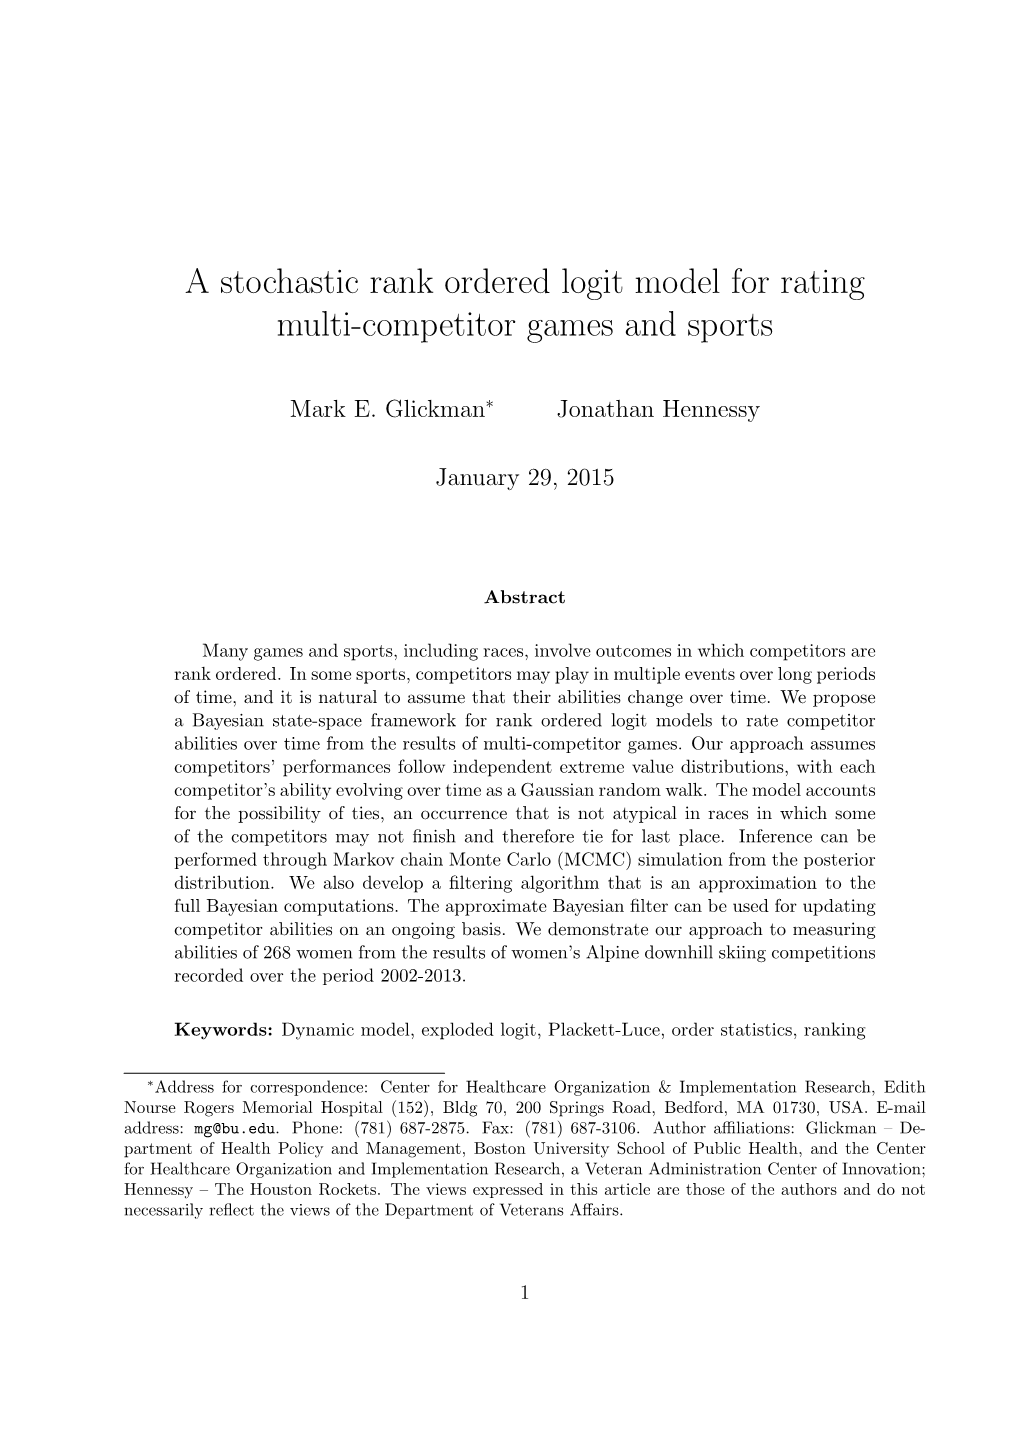 A Stochastic Rank Ordered Logit Model for Rating Multi-Competitor Games and Sports